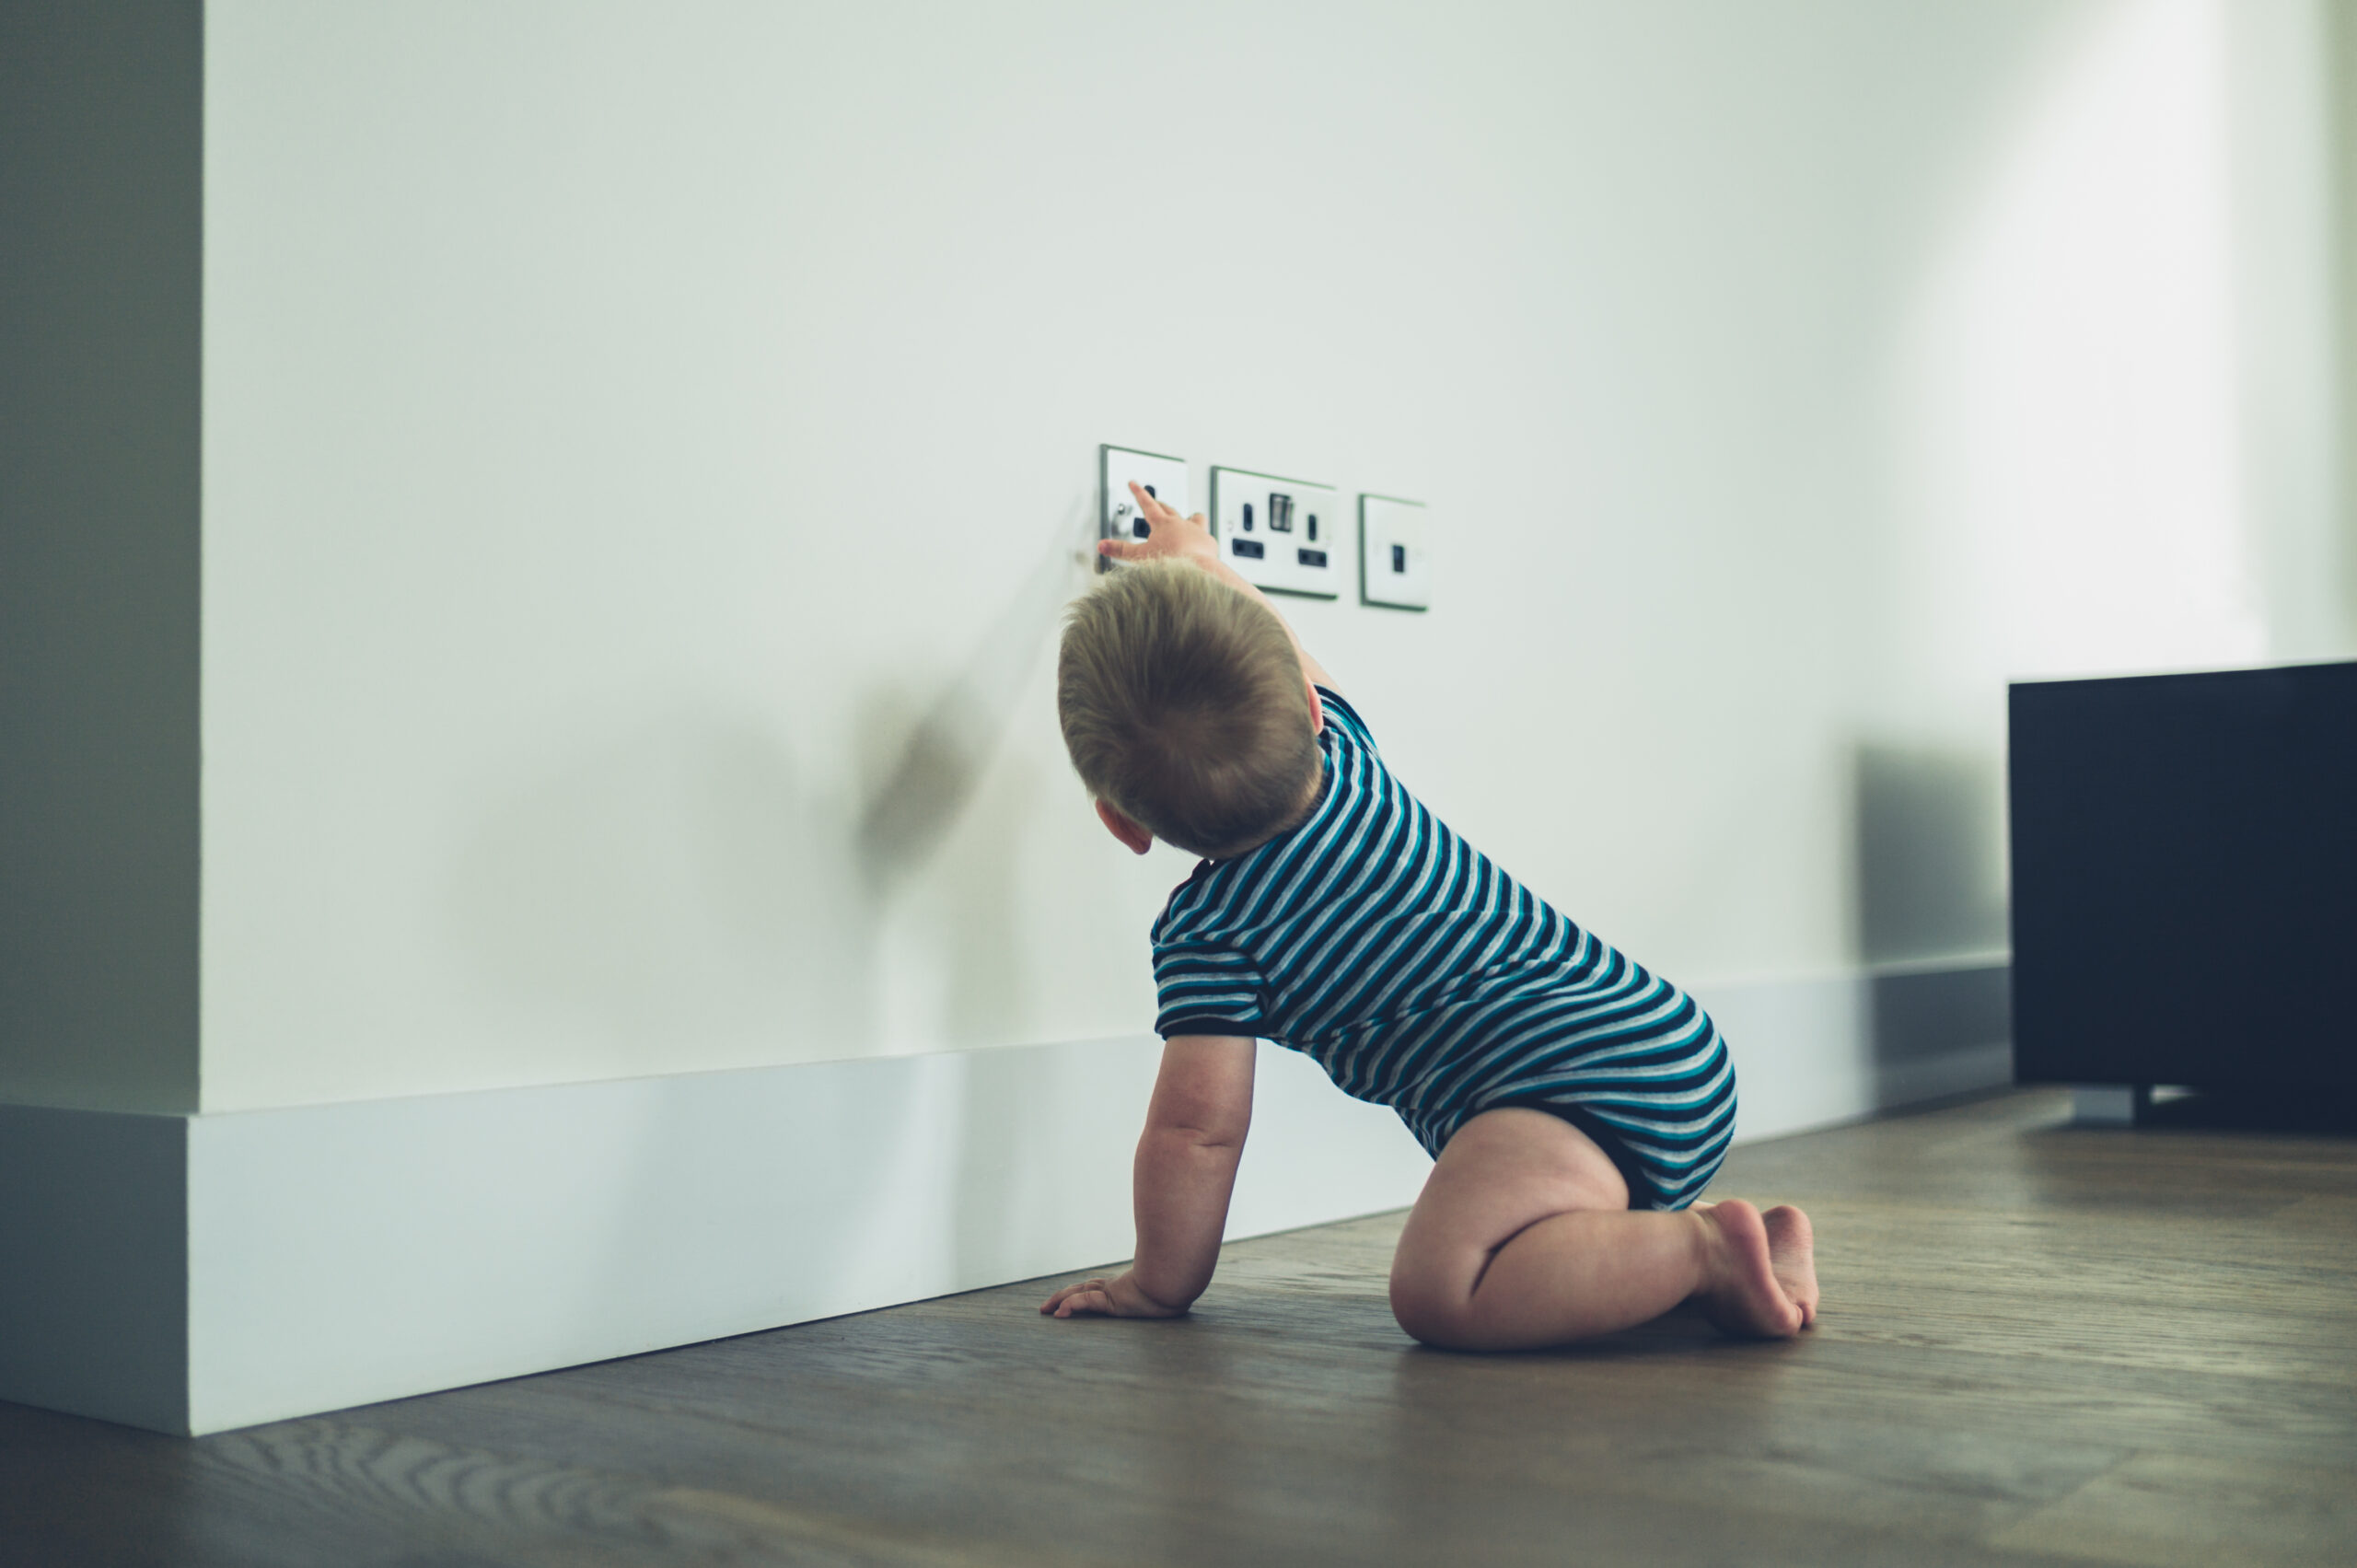 little baby reaching for electrical outlet, childproofing, electrical safety